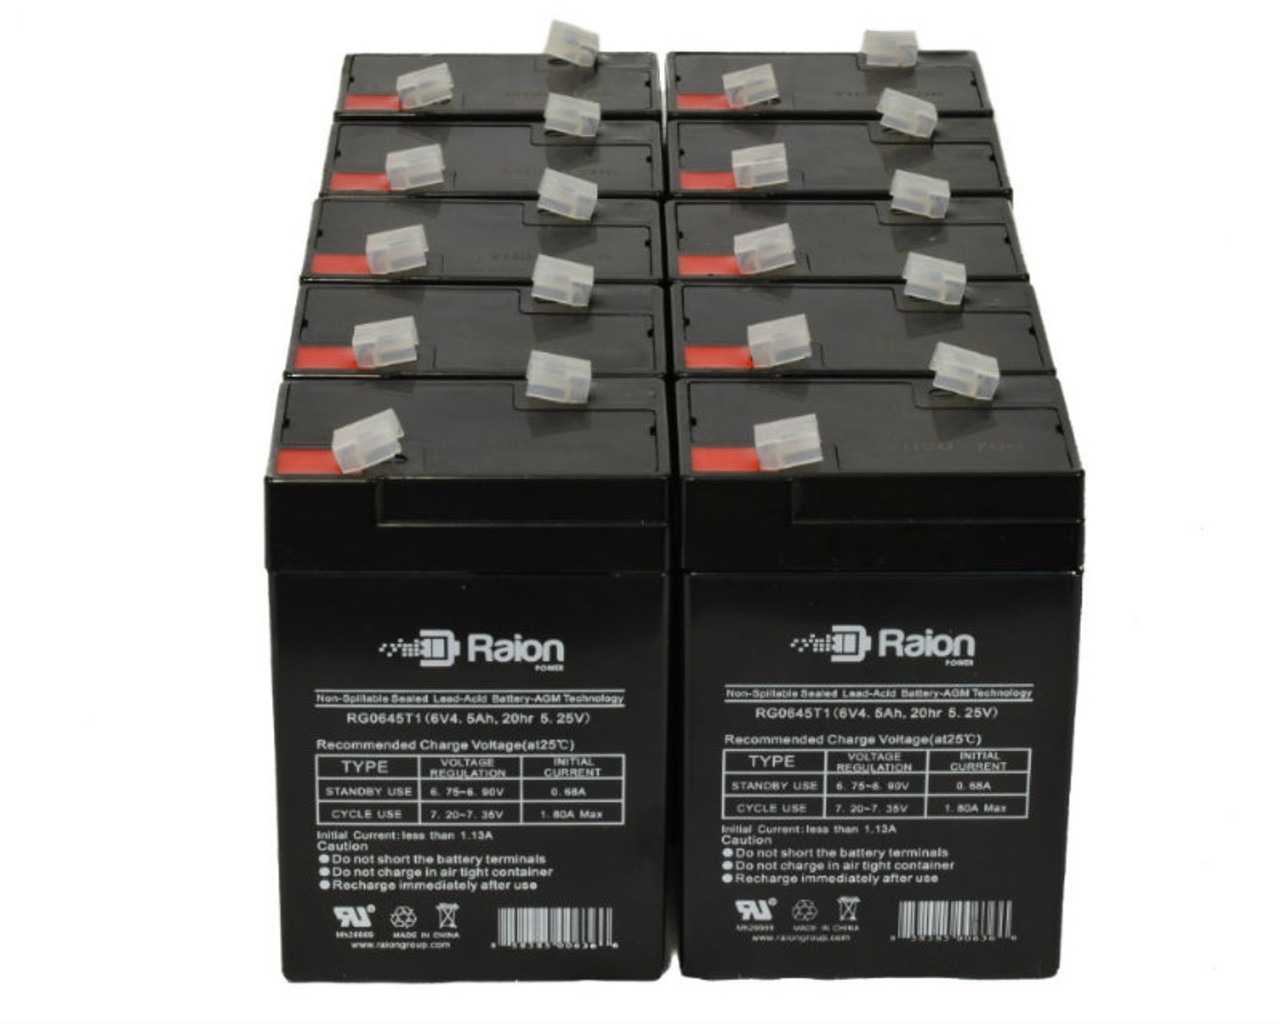 Raion Power 6 Volt 4.5Ah RG0645T1 Replacement Battery for Unibo GB6-4.5 - 10 Pack